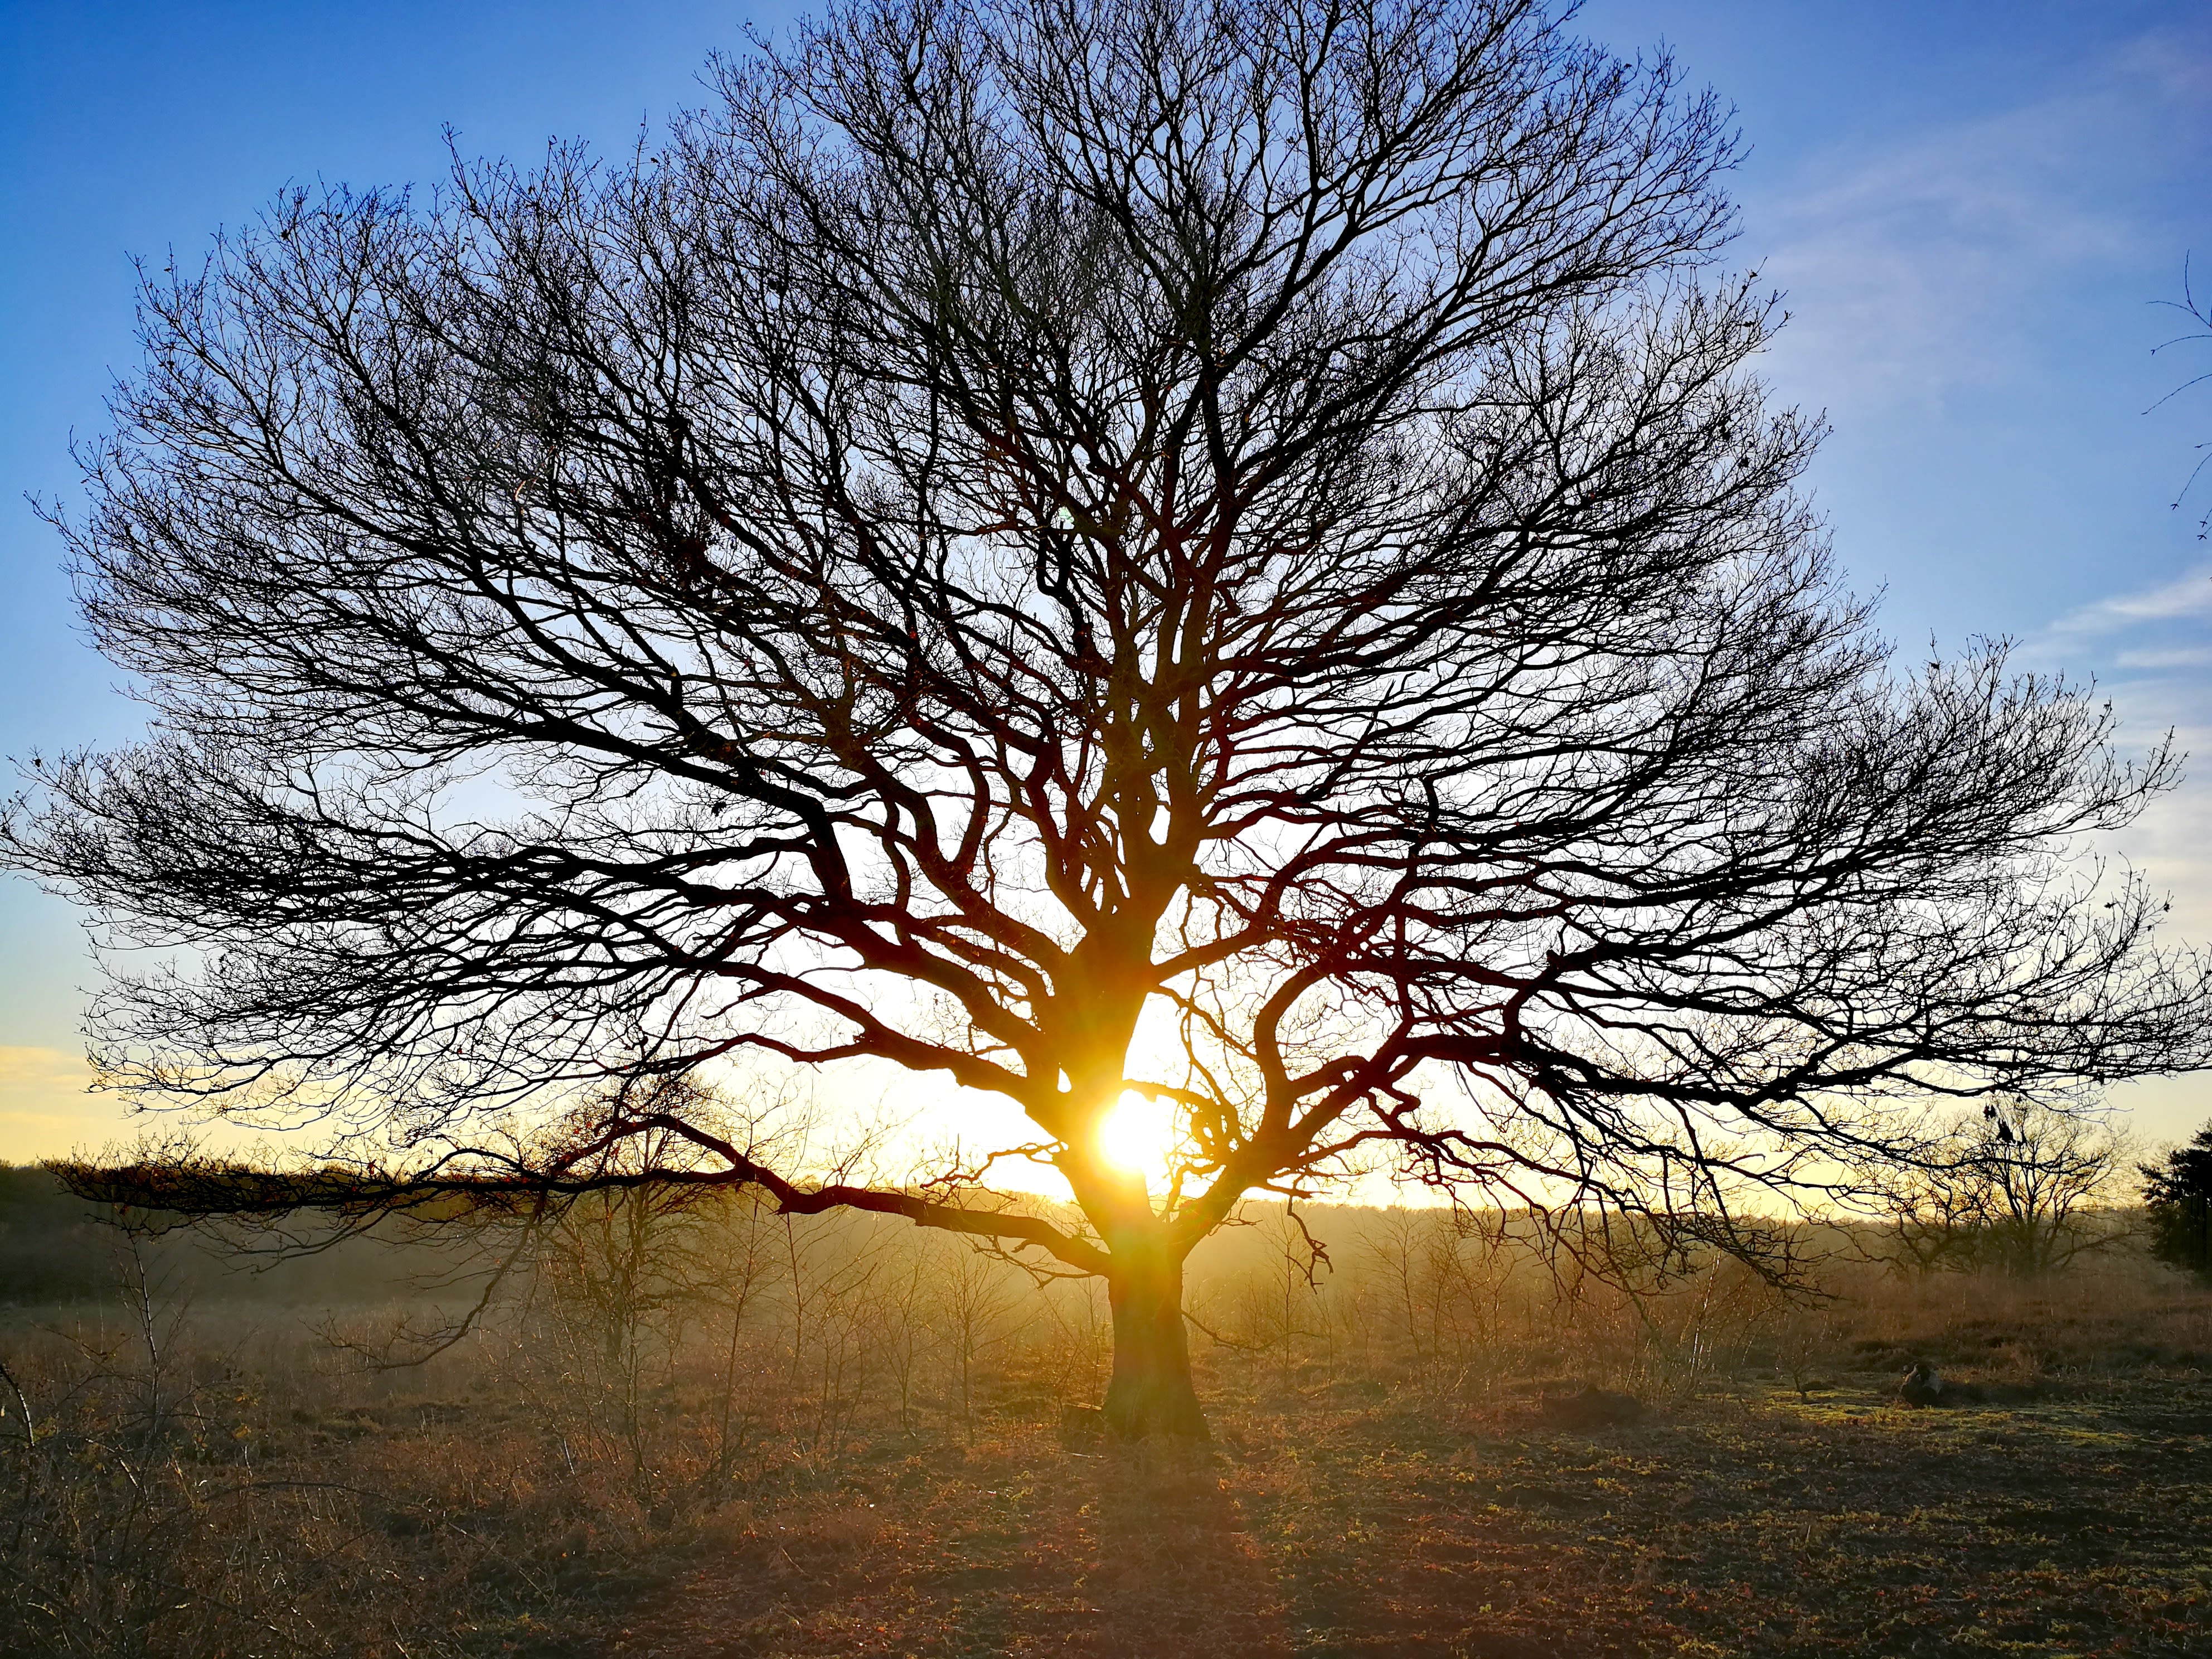 A leafless tree with the sun setting in the background.